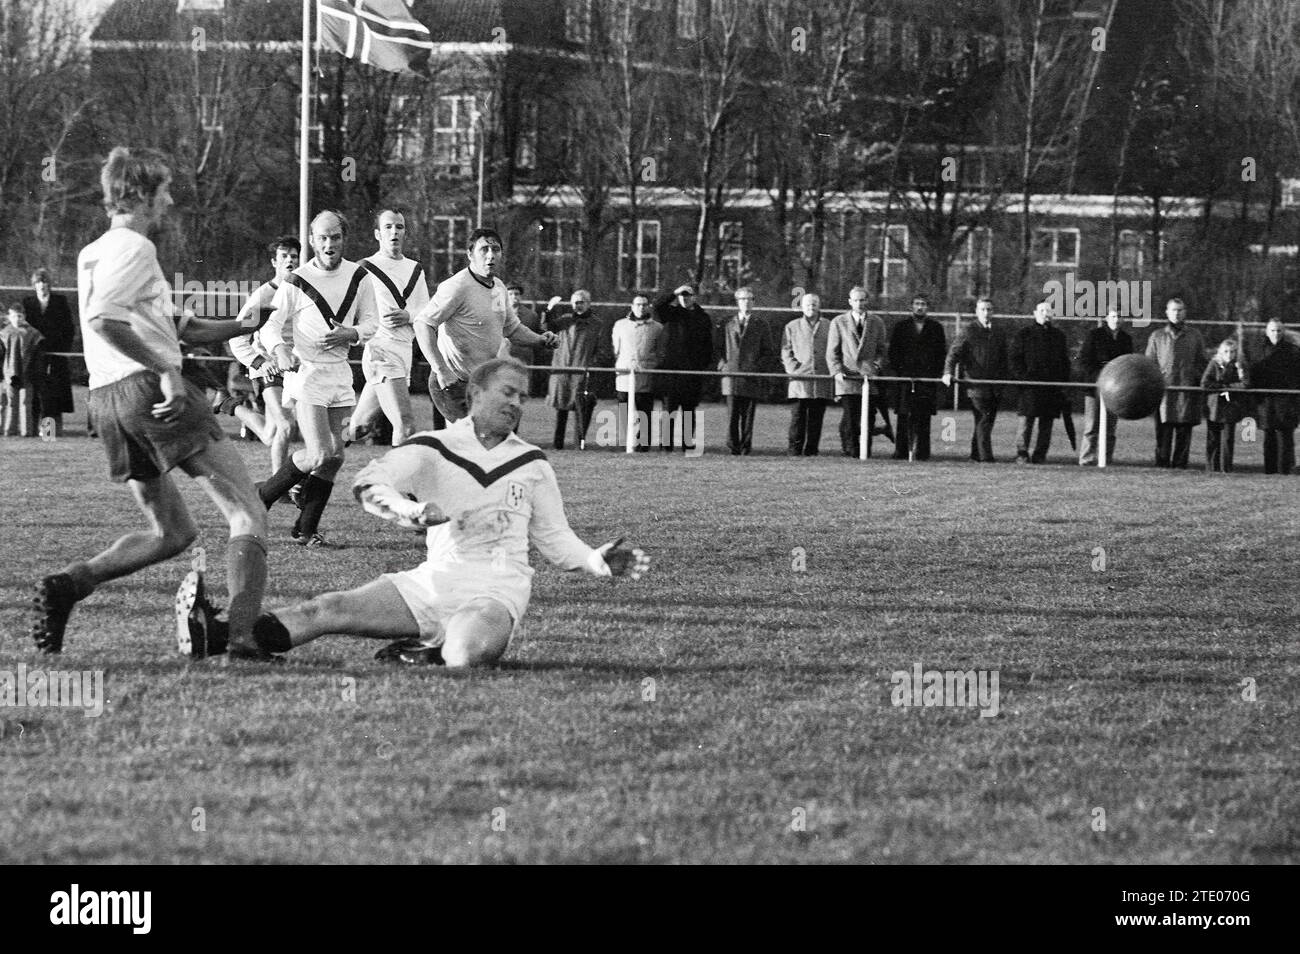 Velsen - Purmersteijn, Football V.S.V., Velsen, Stormvogels, 22-11-1970, Whizgle News from the Past, Tailored for the Future. Explore historical narratives, Dutch The Netherlands agency image with a modern perspective, bridging the gap between yesterday's events and tomorrow's insights. A timeless journey shaping the stories that shape our future. Stock Photo